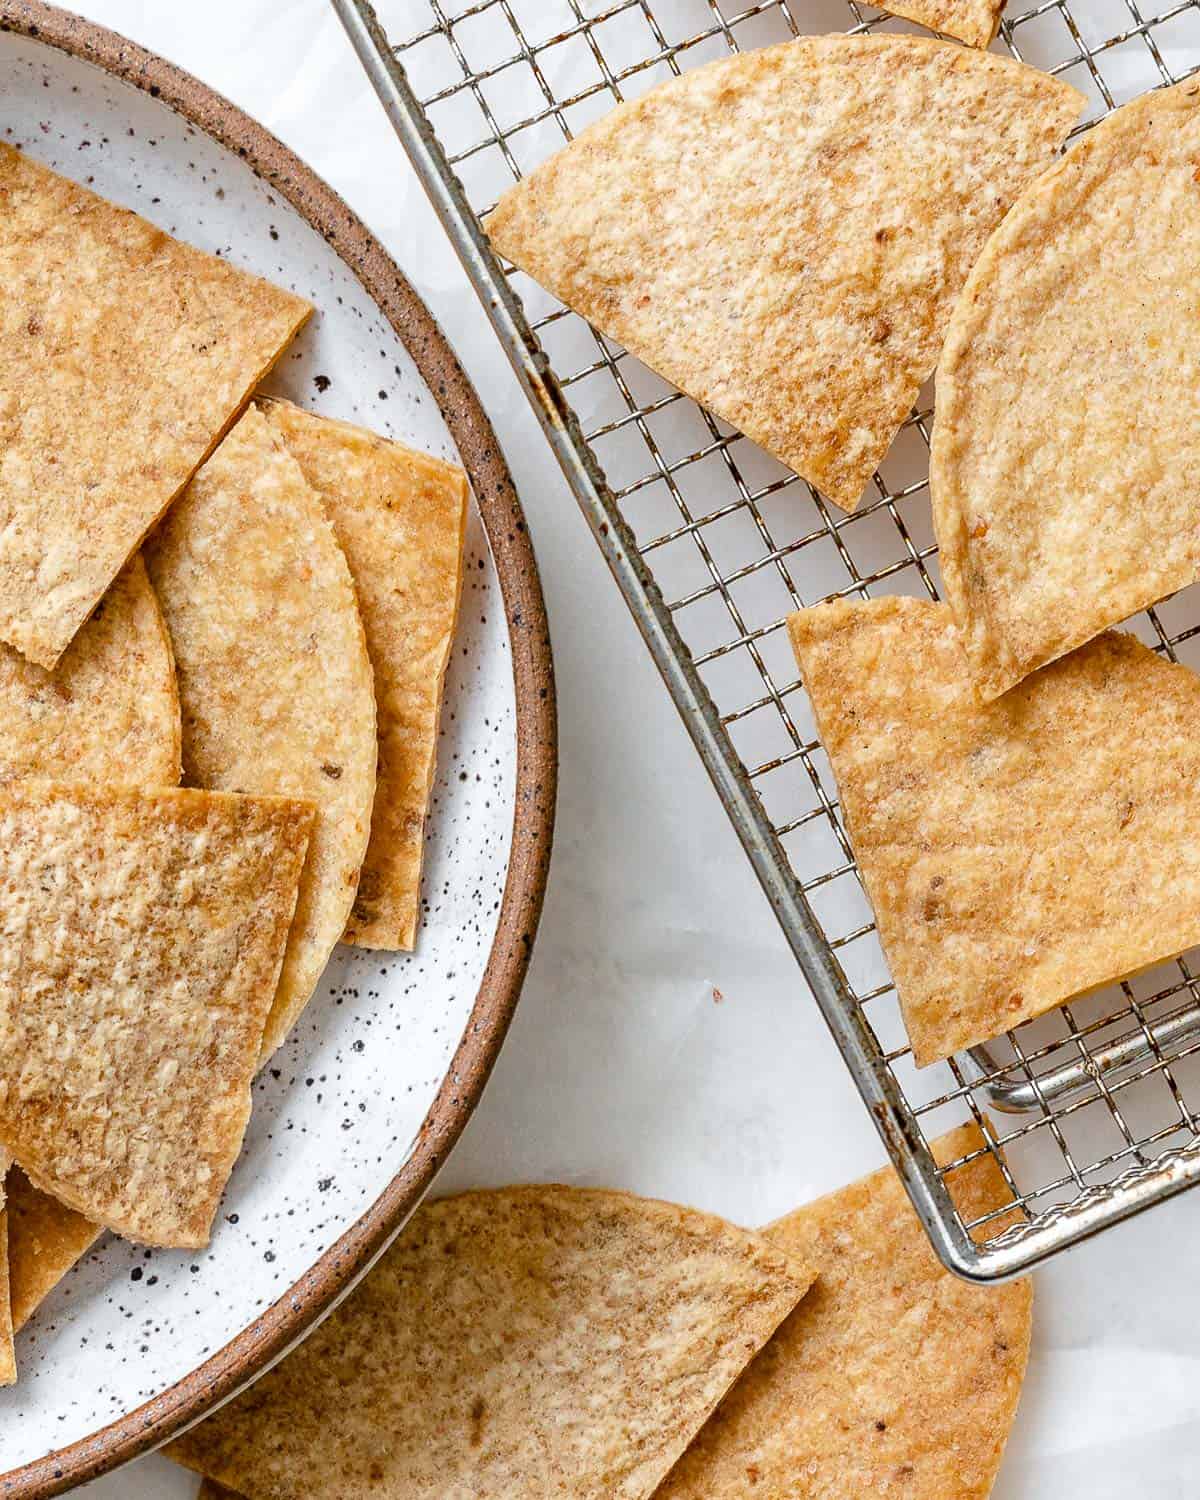 completed Air Fryer Tortilla Chips plated alongside chips against a white surface with salsa on the side